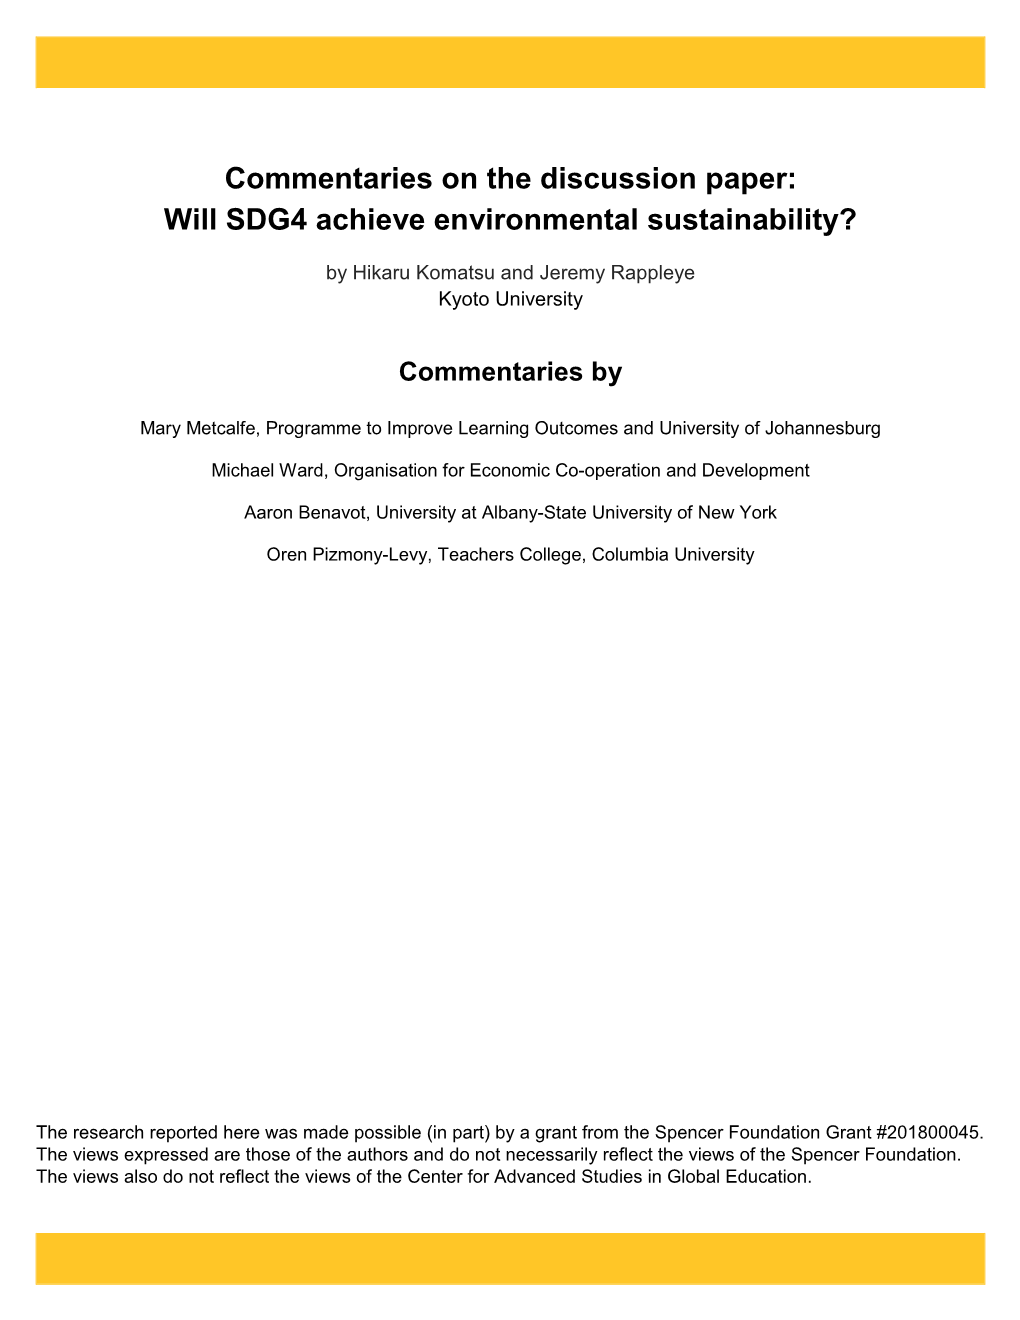 Commentaries on the Discussion Paper: Will SDG4 Achieve Environmental Sustainability?